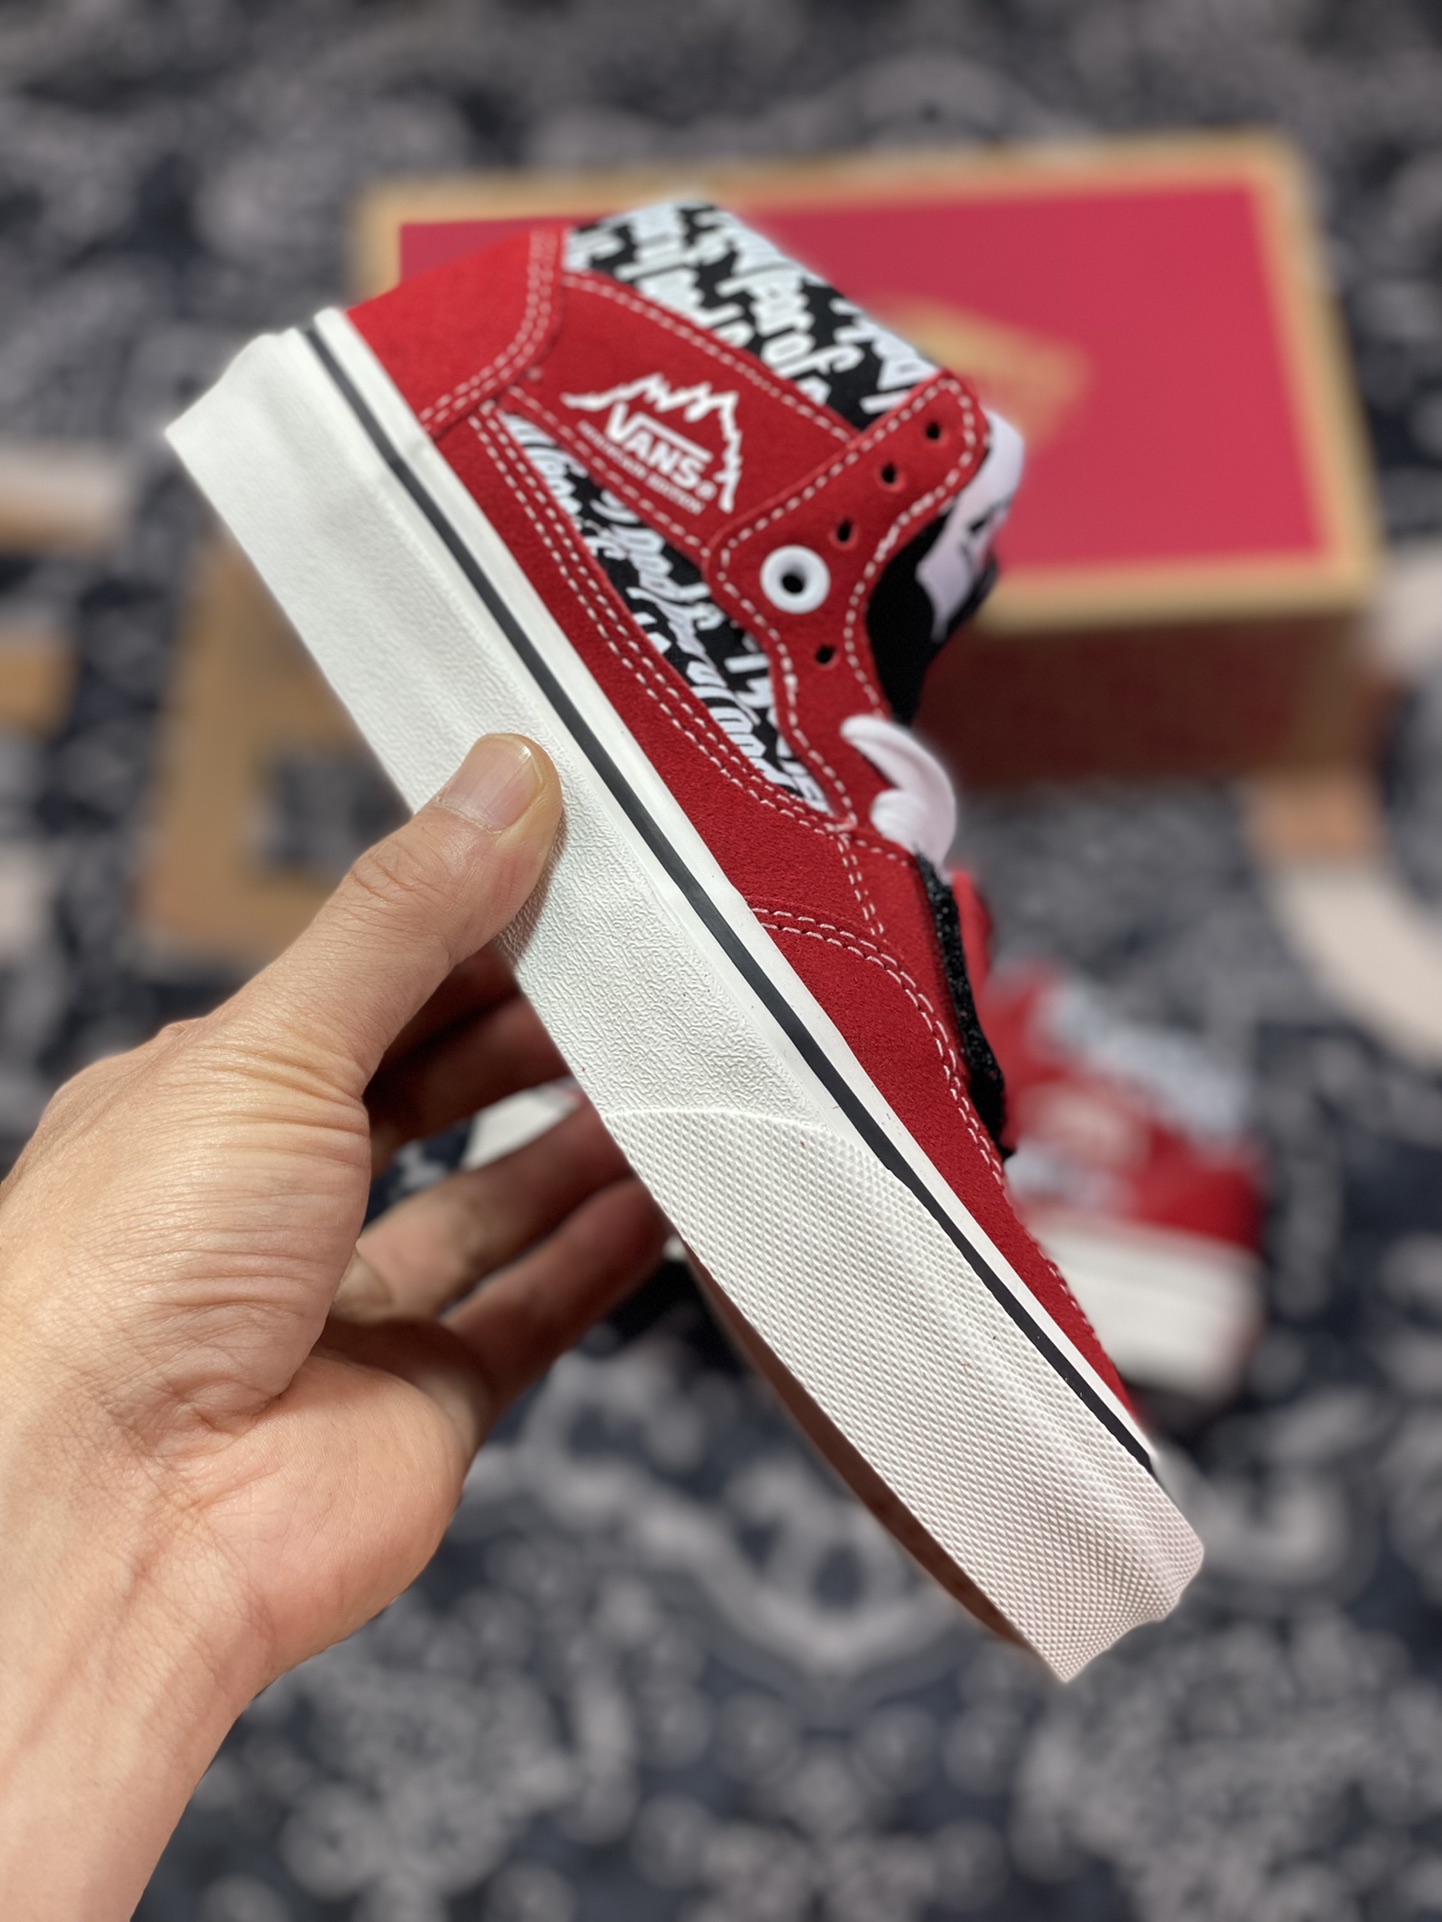 Fear Of God x Vans Mountain Edition joint Velcro stitching black and red casual skate shoes